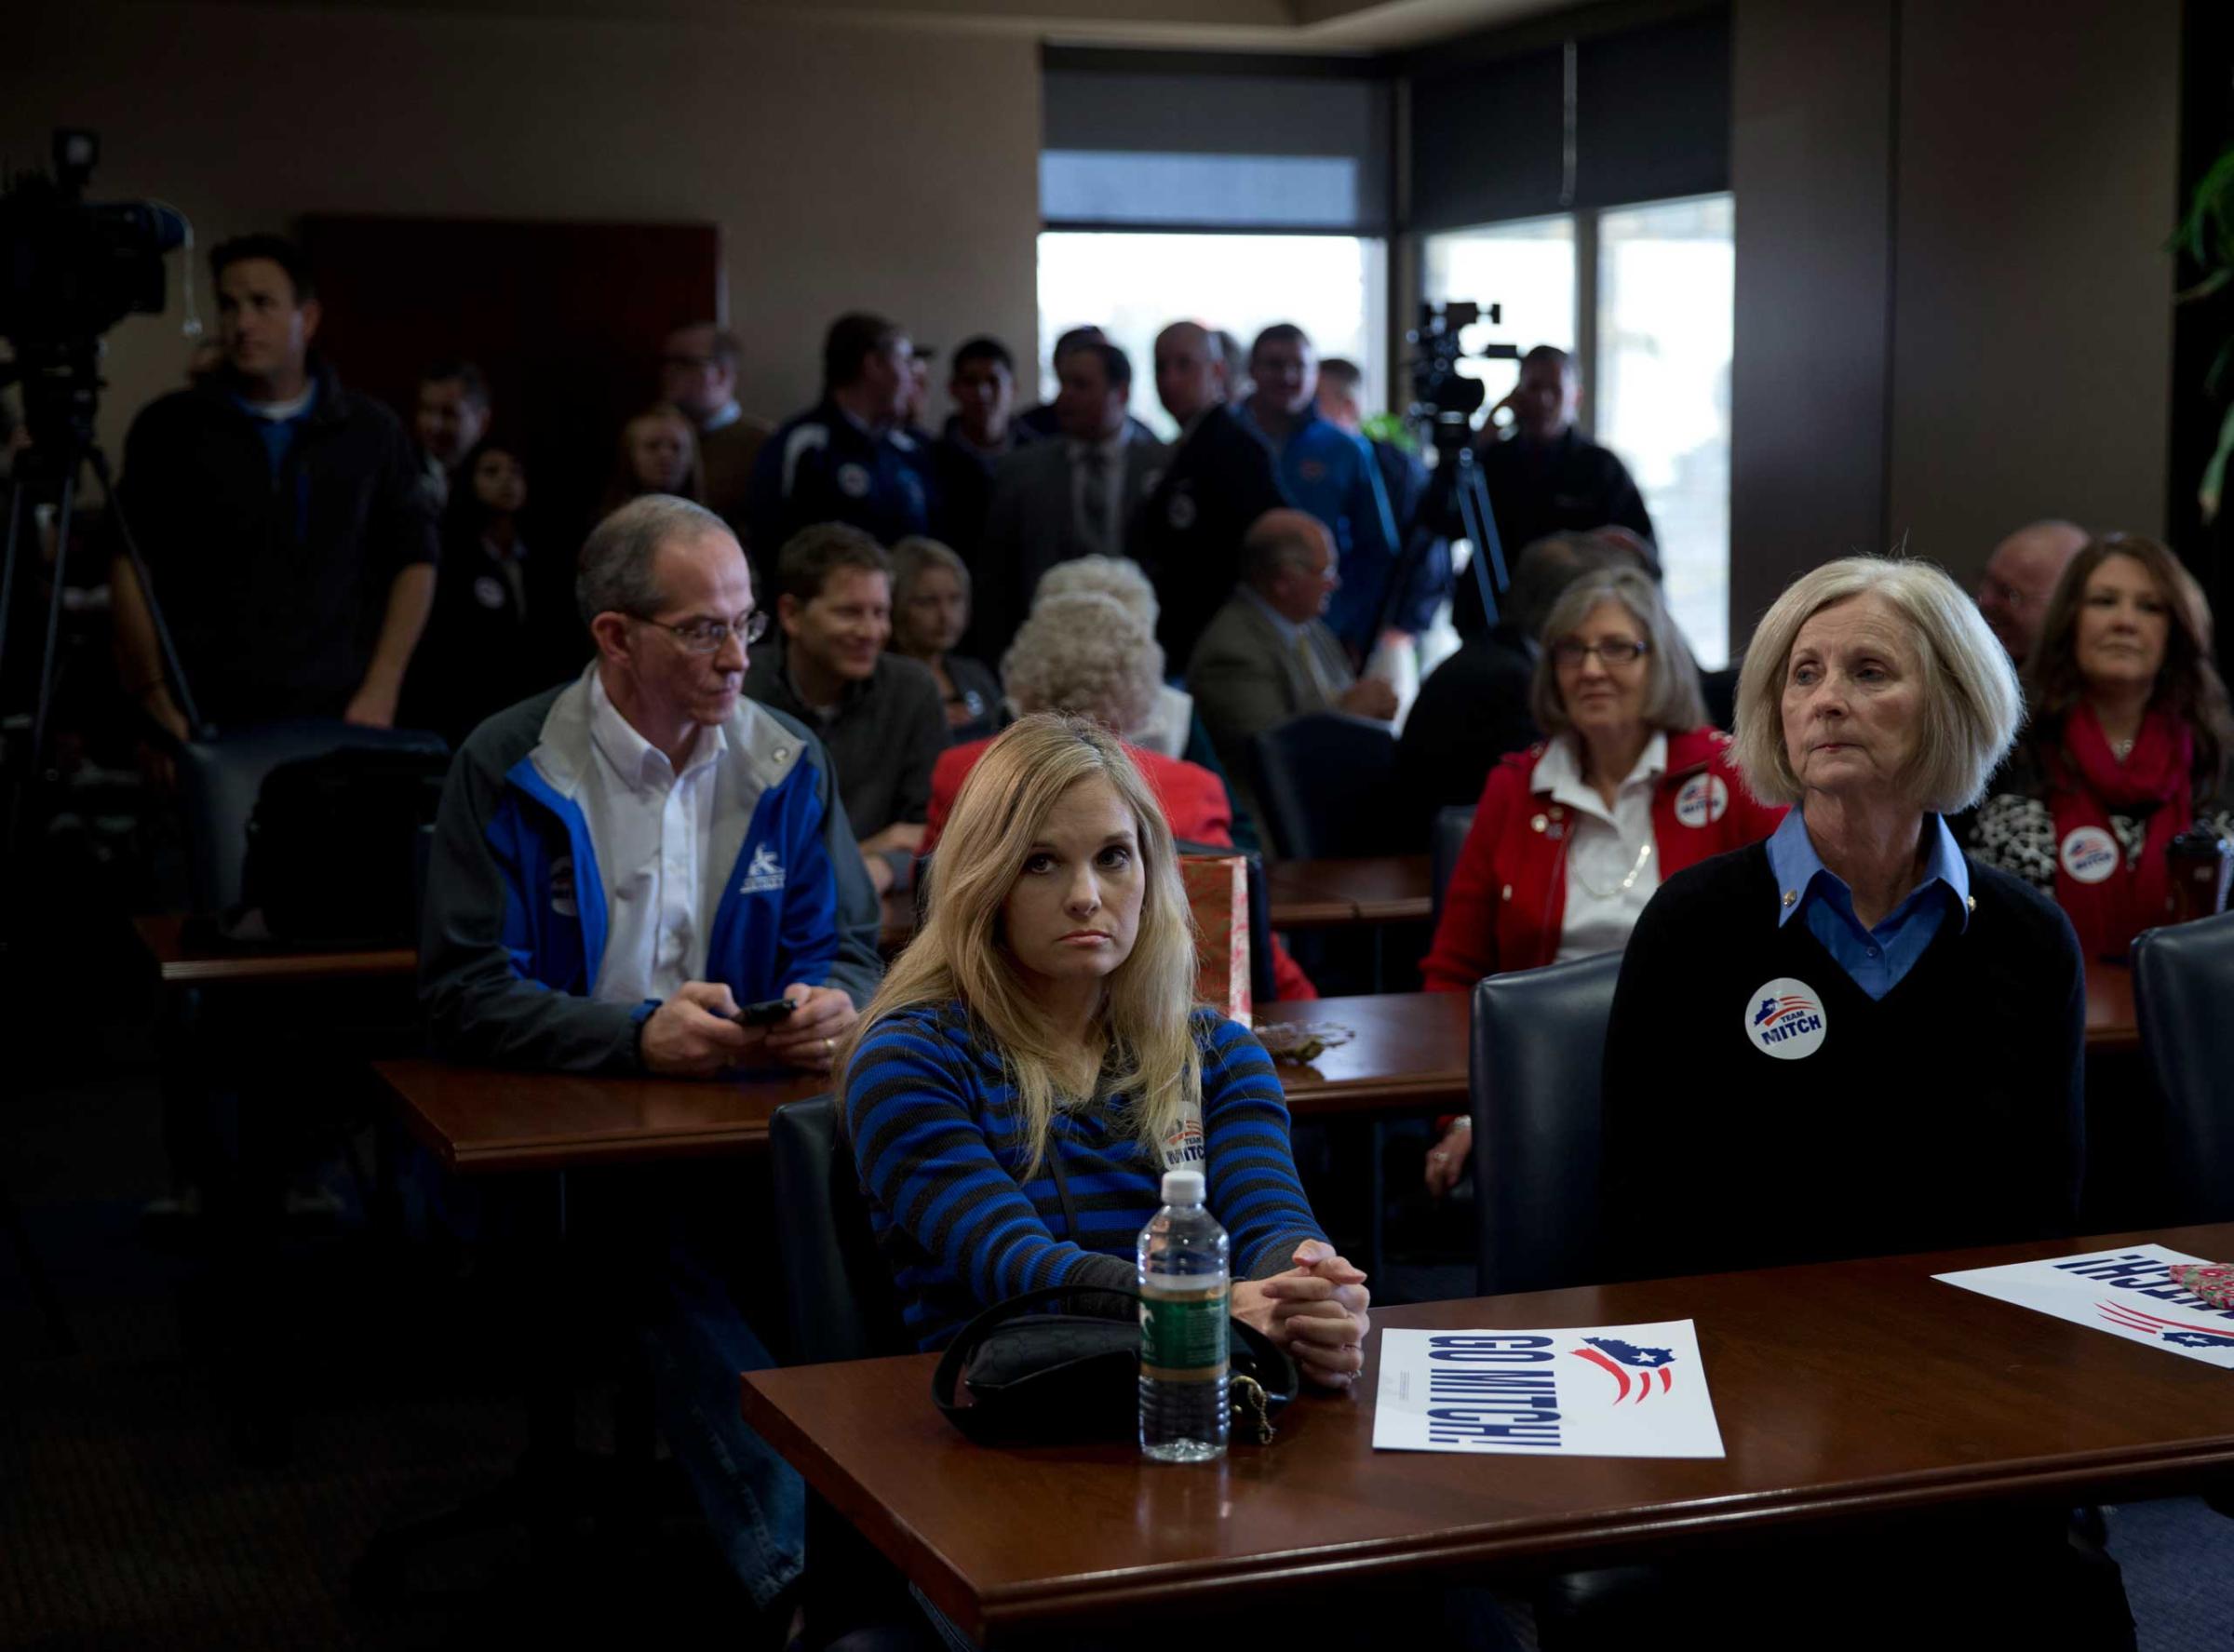 Supporters of Sen. Mitch McConnell are seen at a campaign rally at Bluegrass Airport in Lexington, Ky. on Nov. 3, 2014.